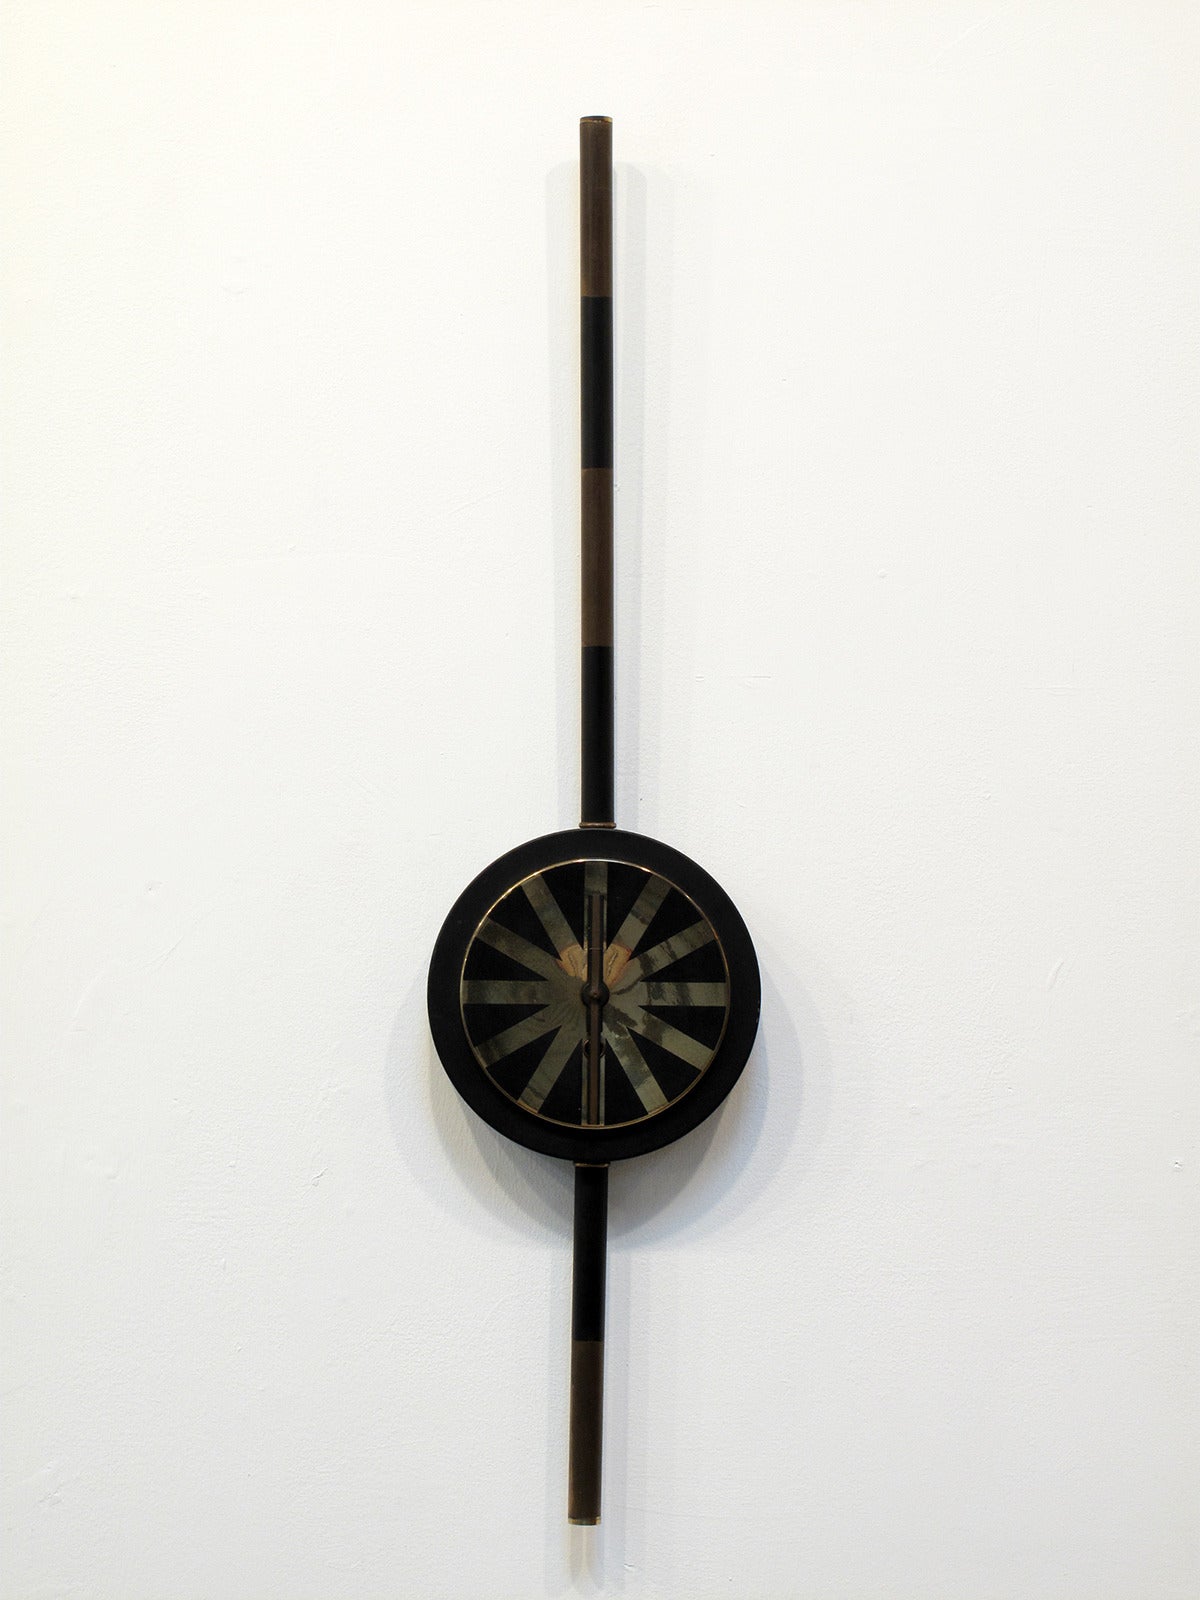 Modernist Wall Clock Made in Germany, 1957 For Sale 1